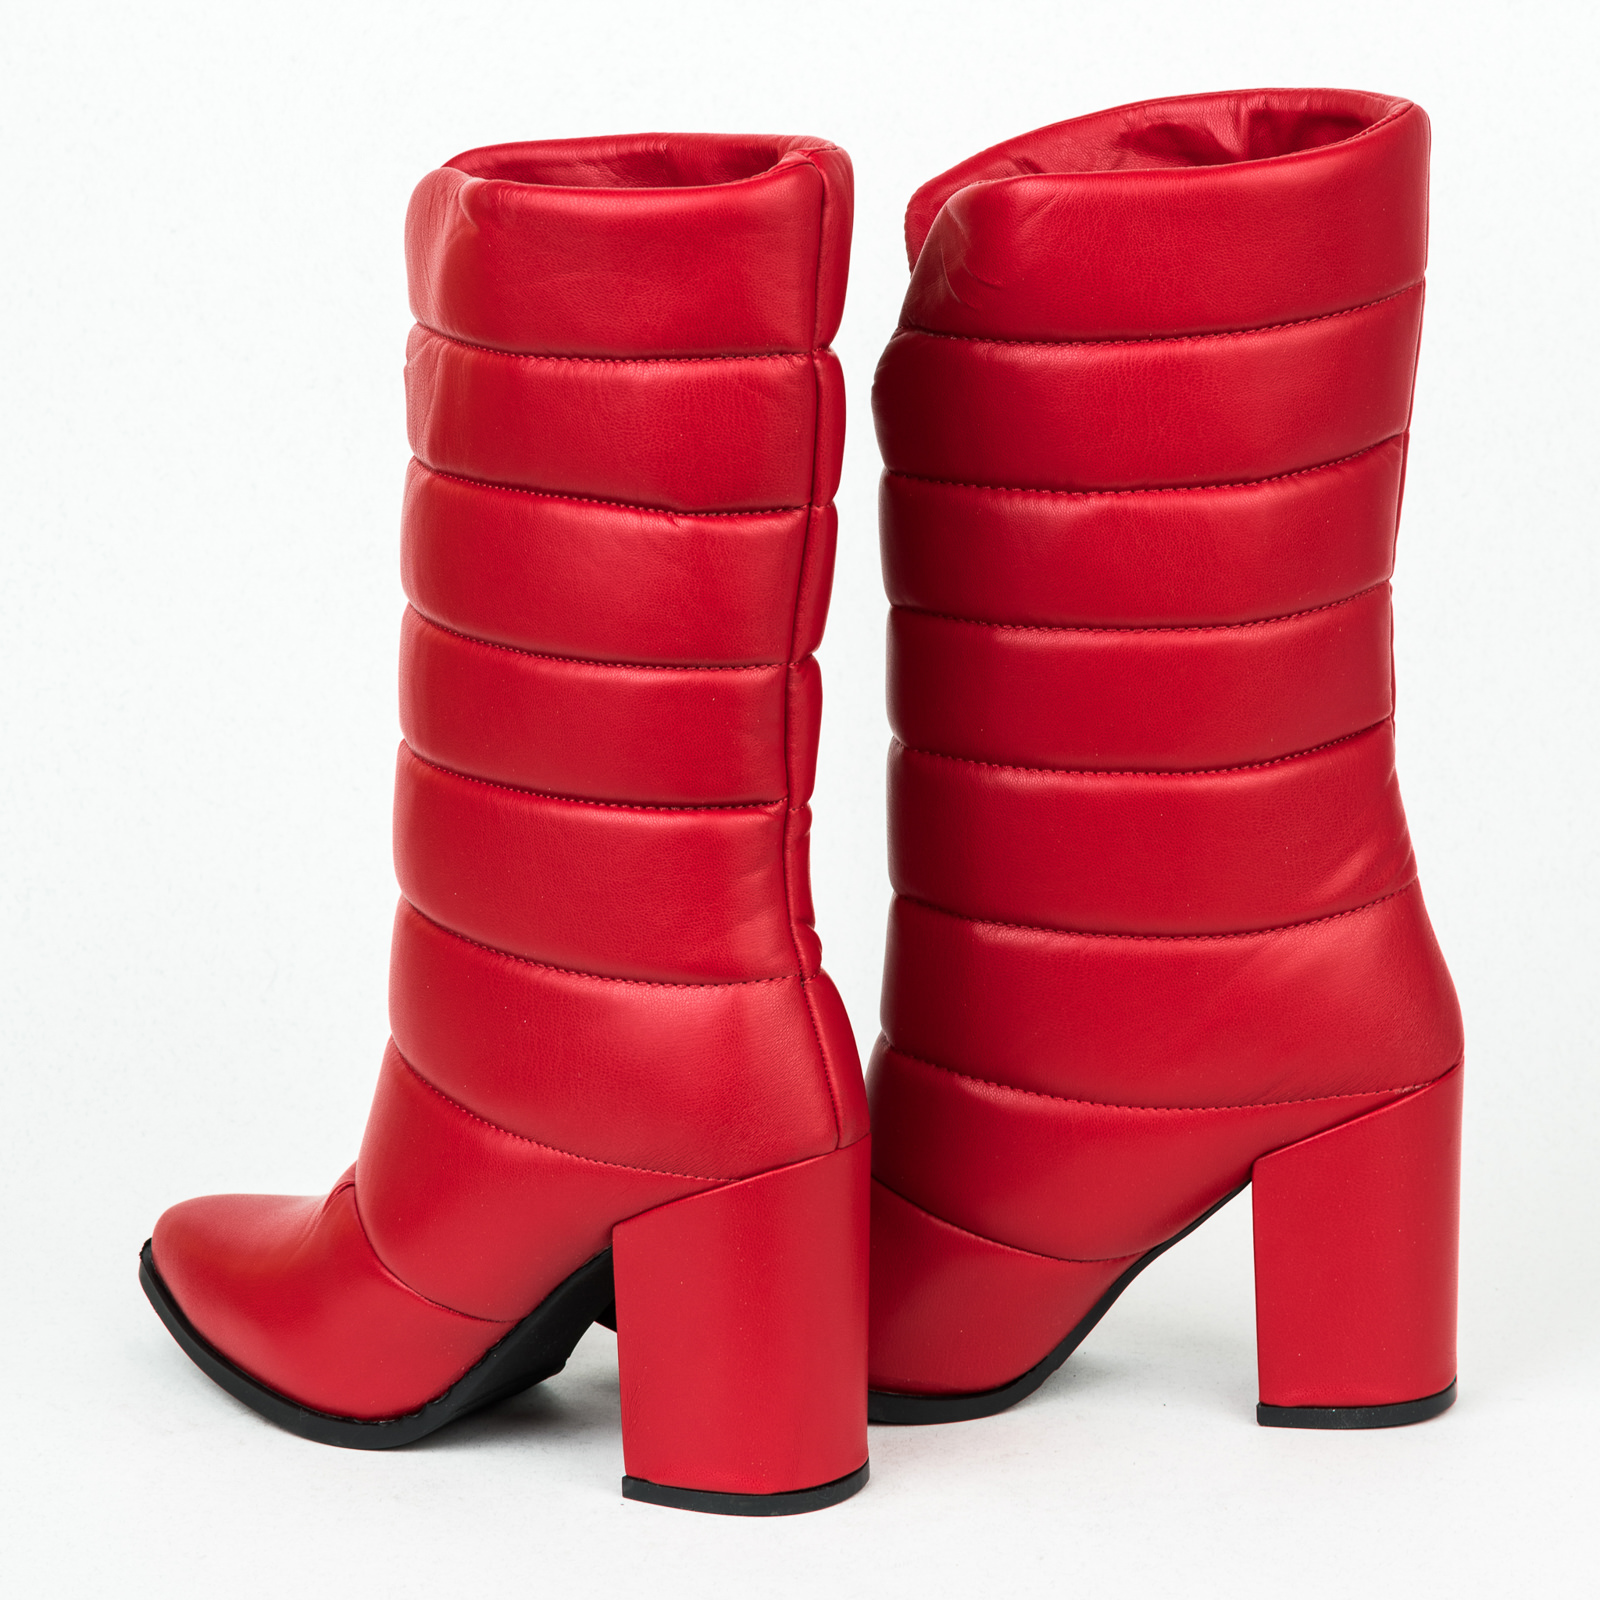 Women ankle boots B139 - RED